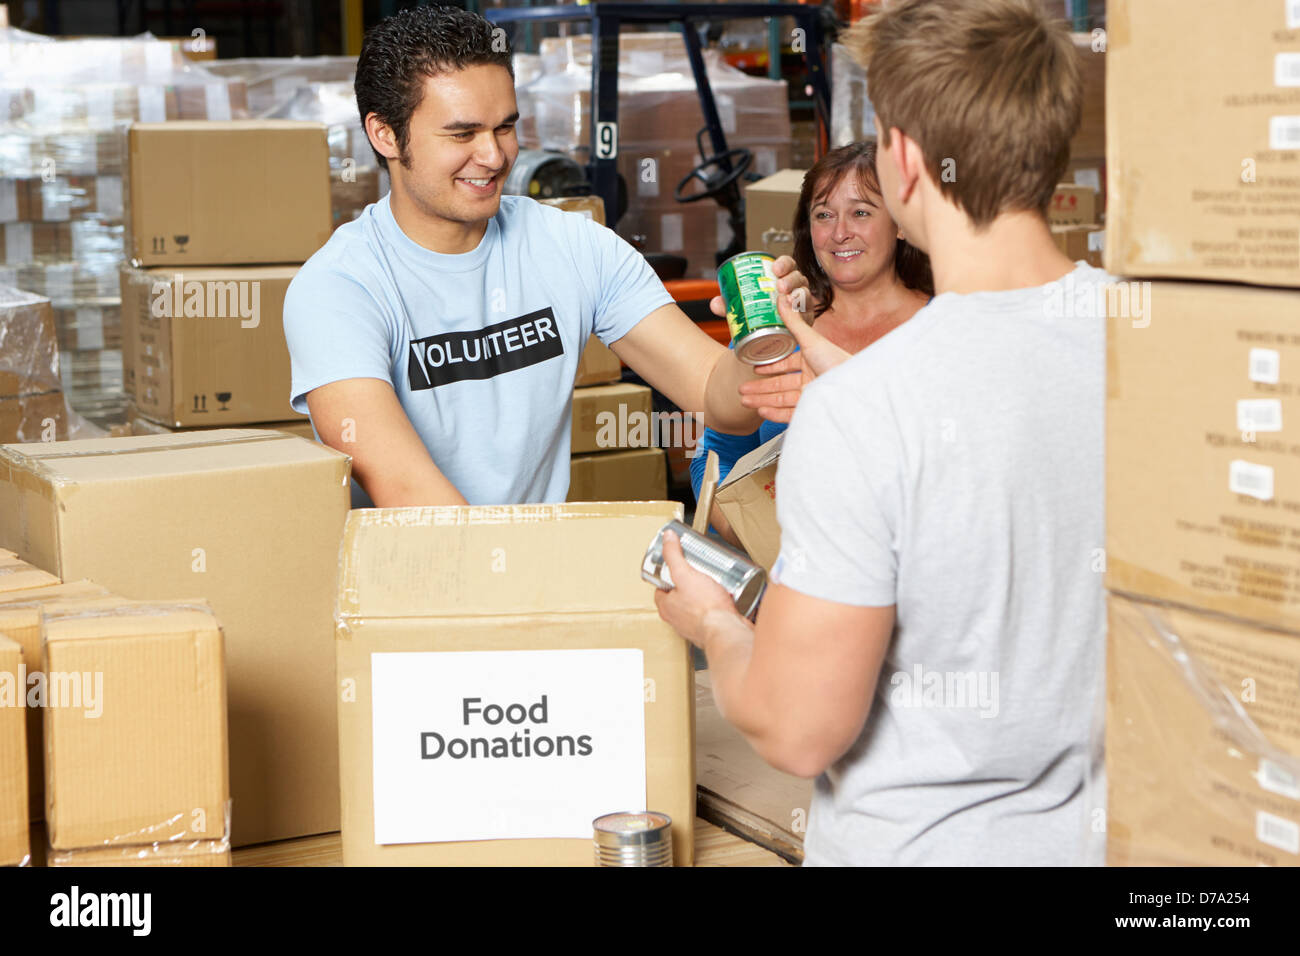 Volunteers Collecting Food Donations In Warehouse Stock Photo